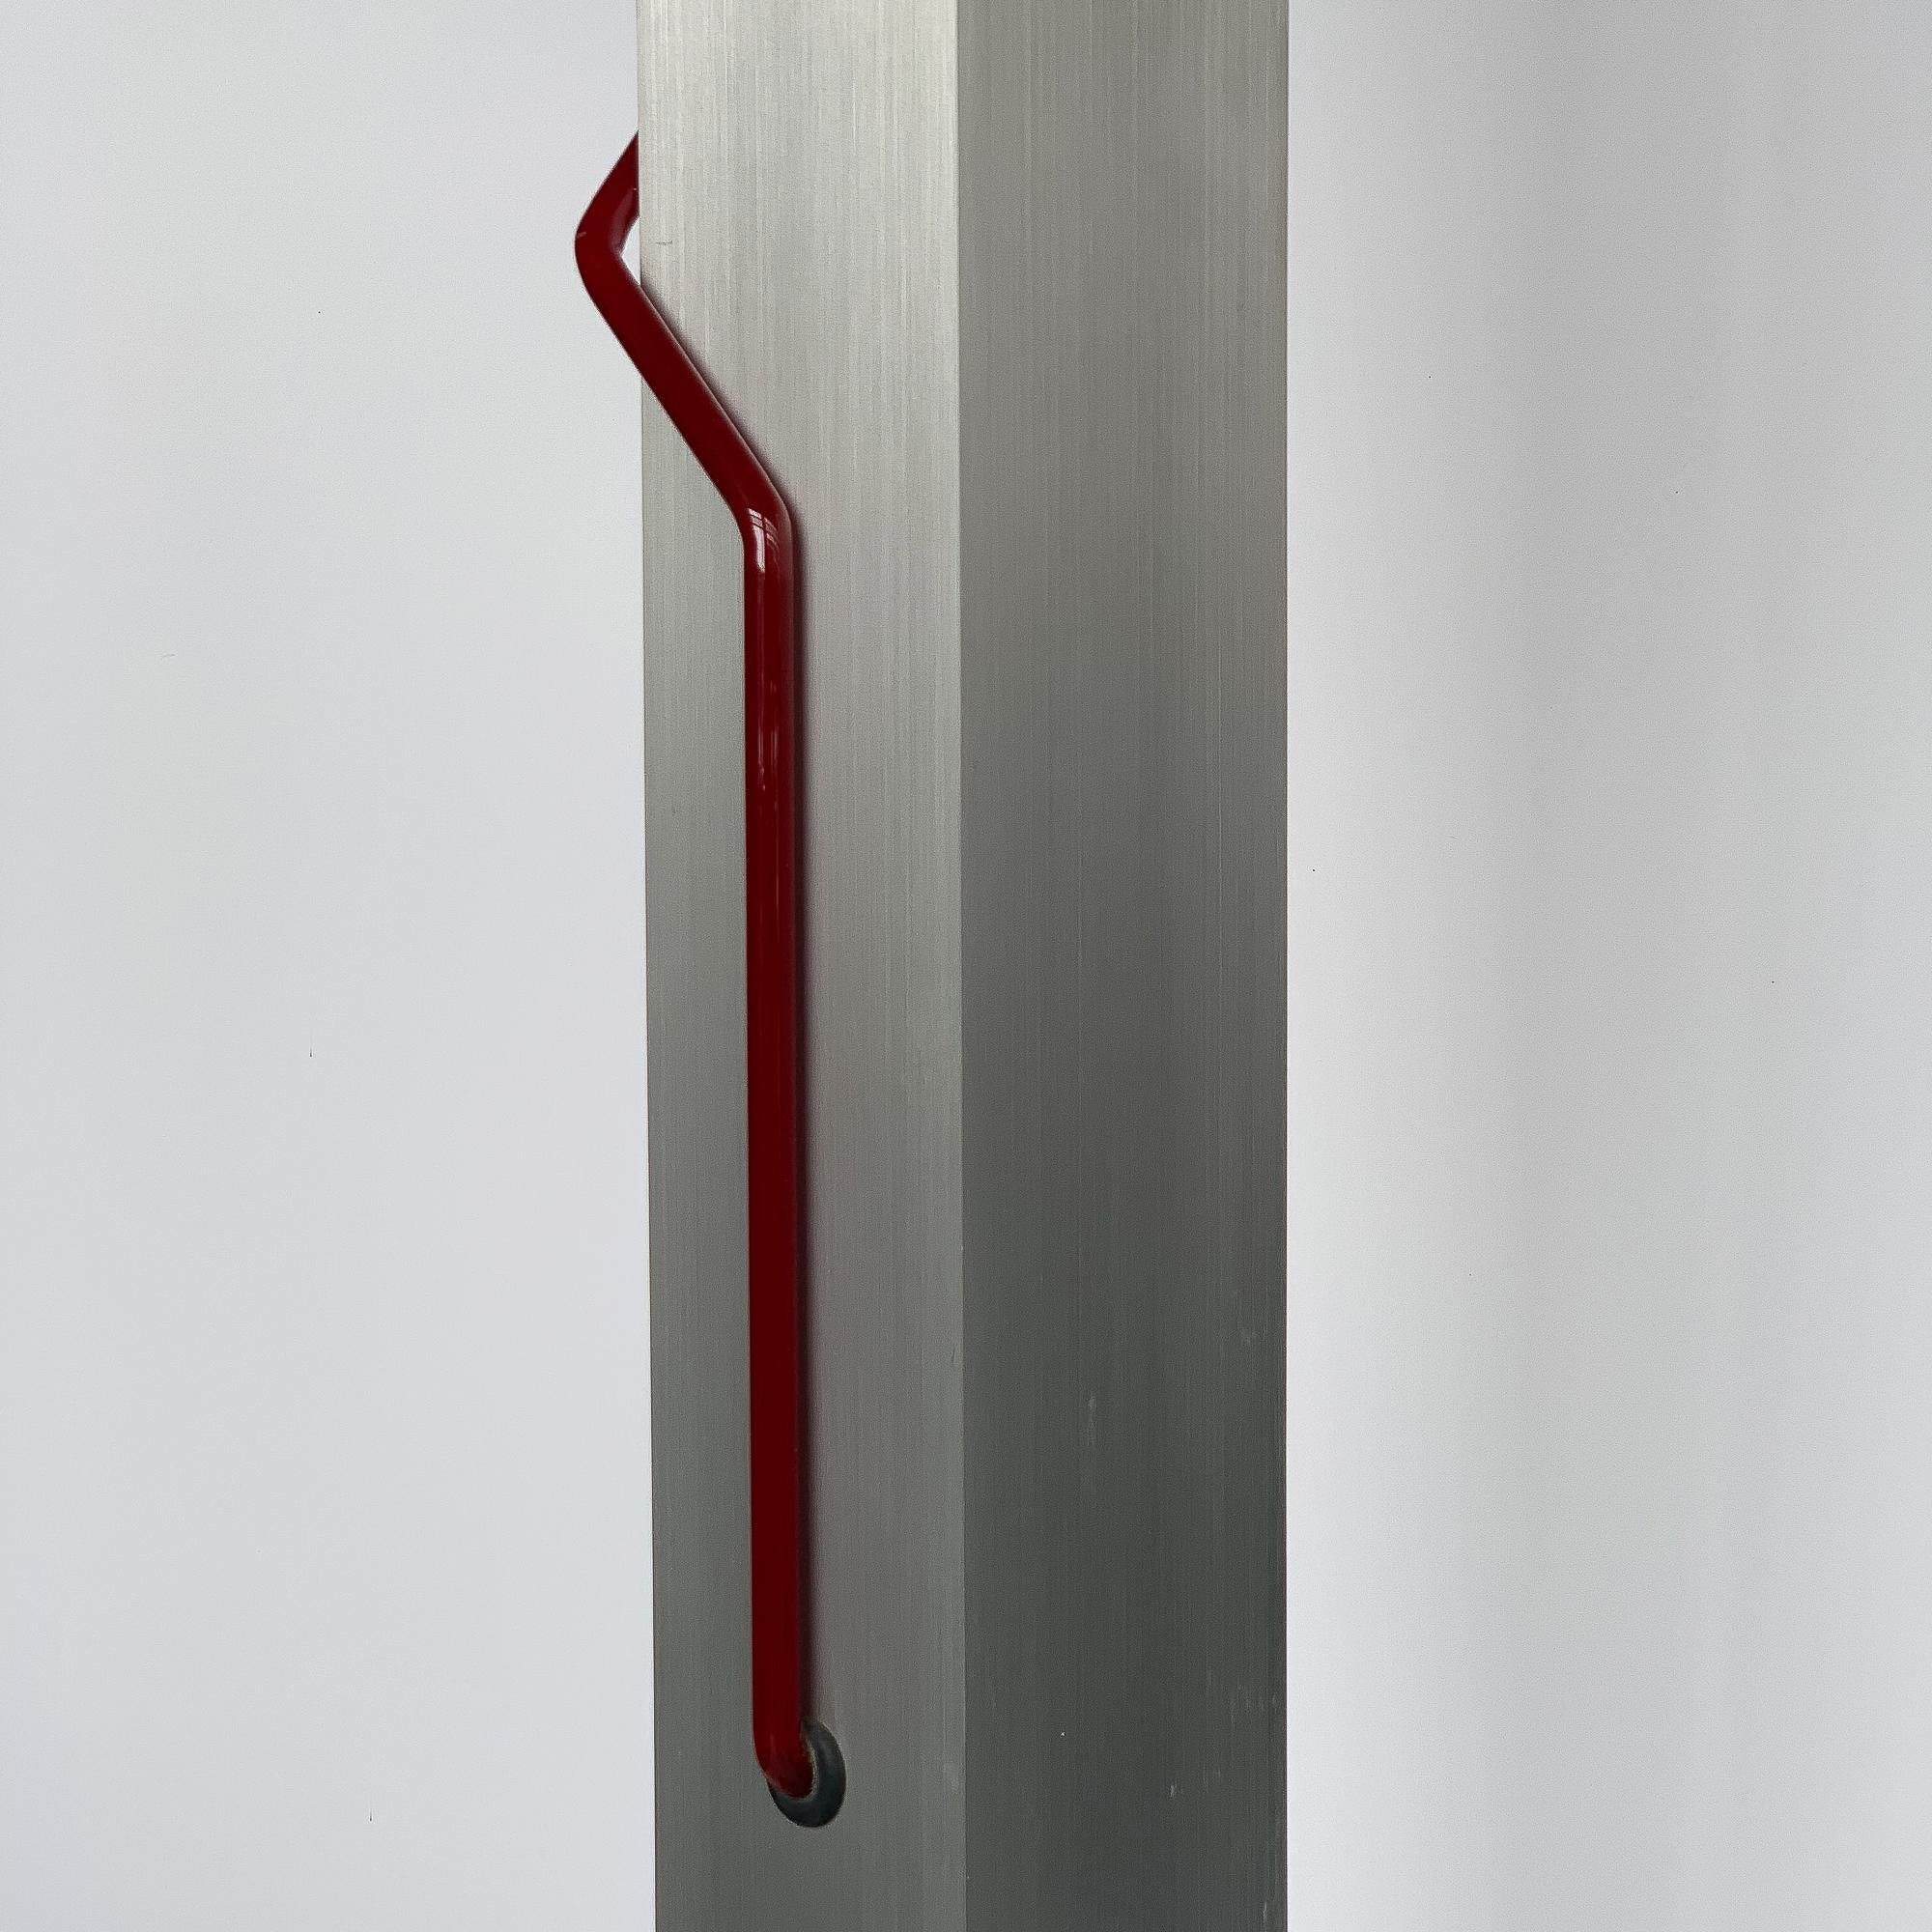 Rare Red Neon and Aluminum Floor Lamp by Rudi Stern and Don Chelsea for Kovacs 9